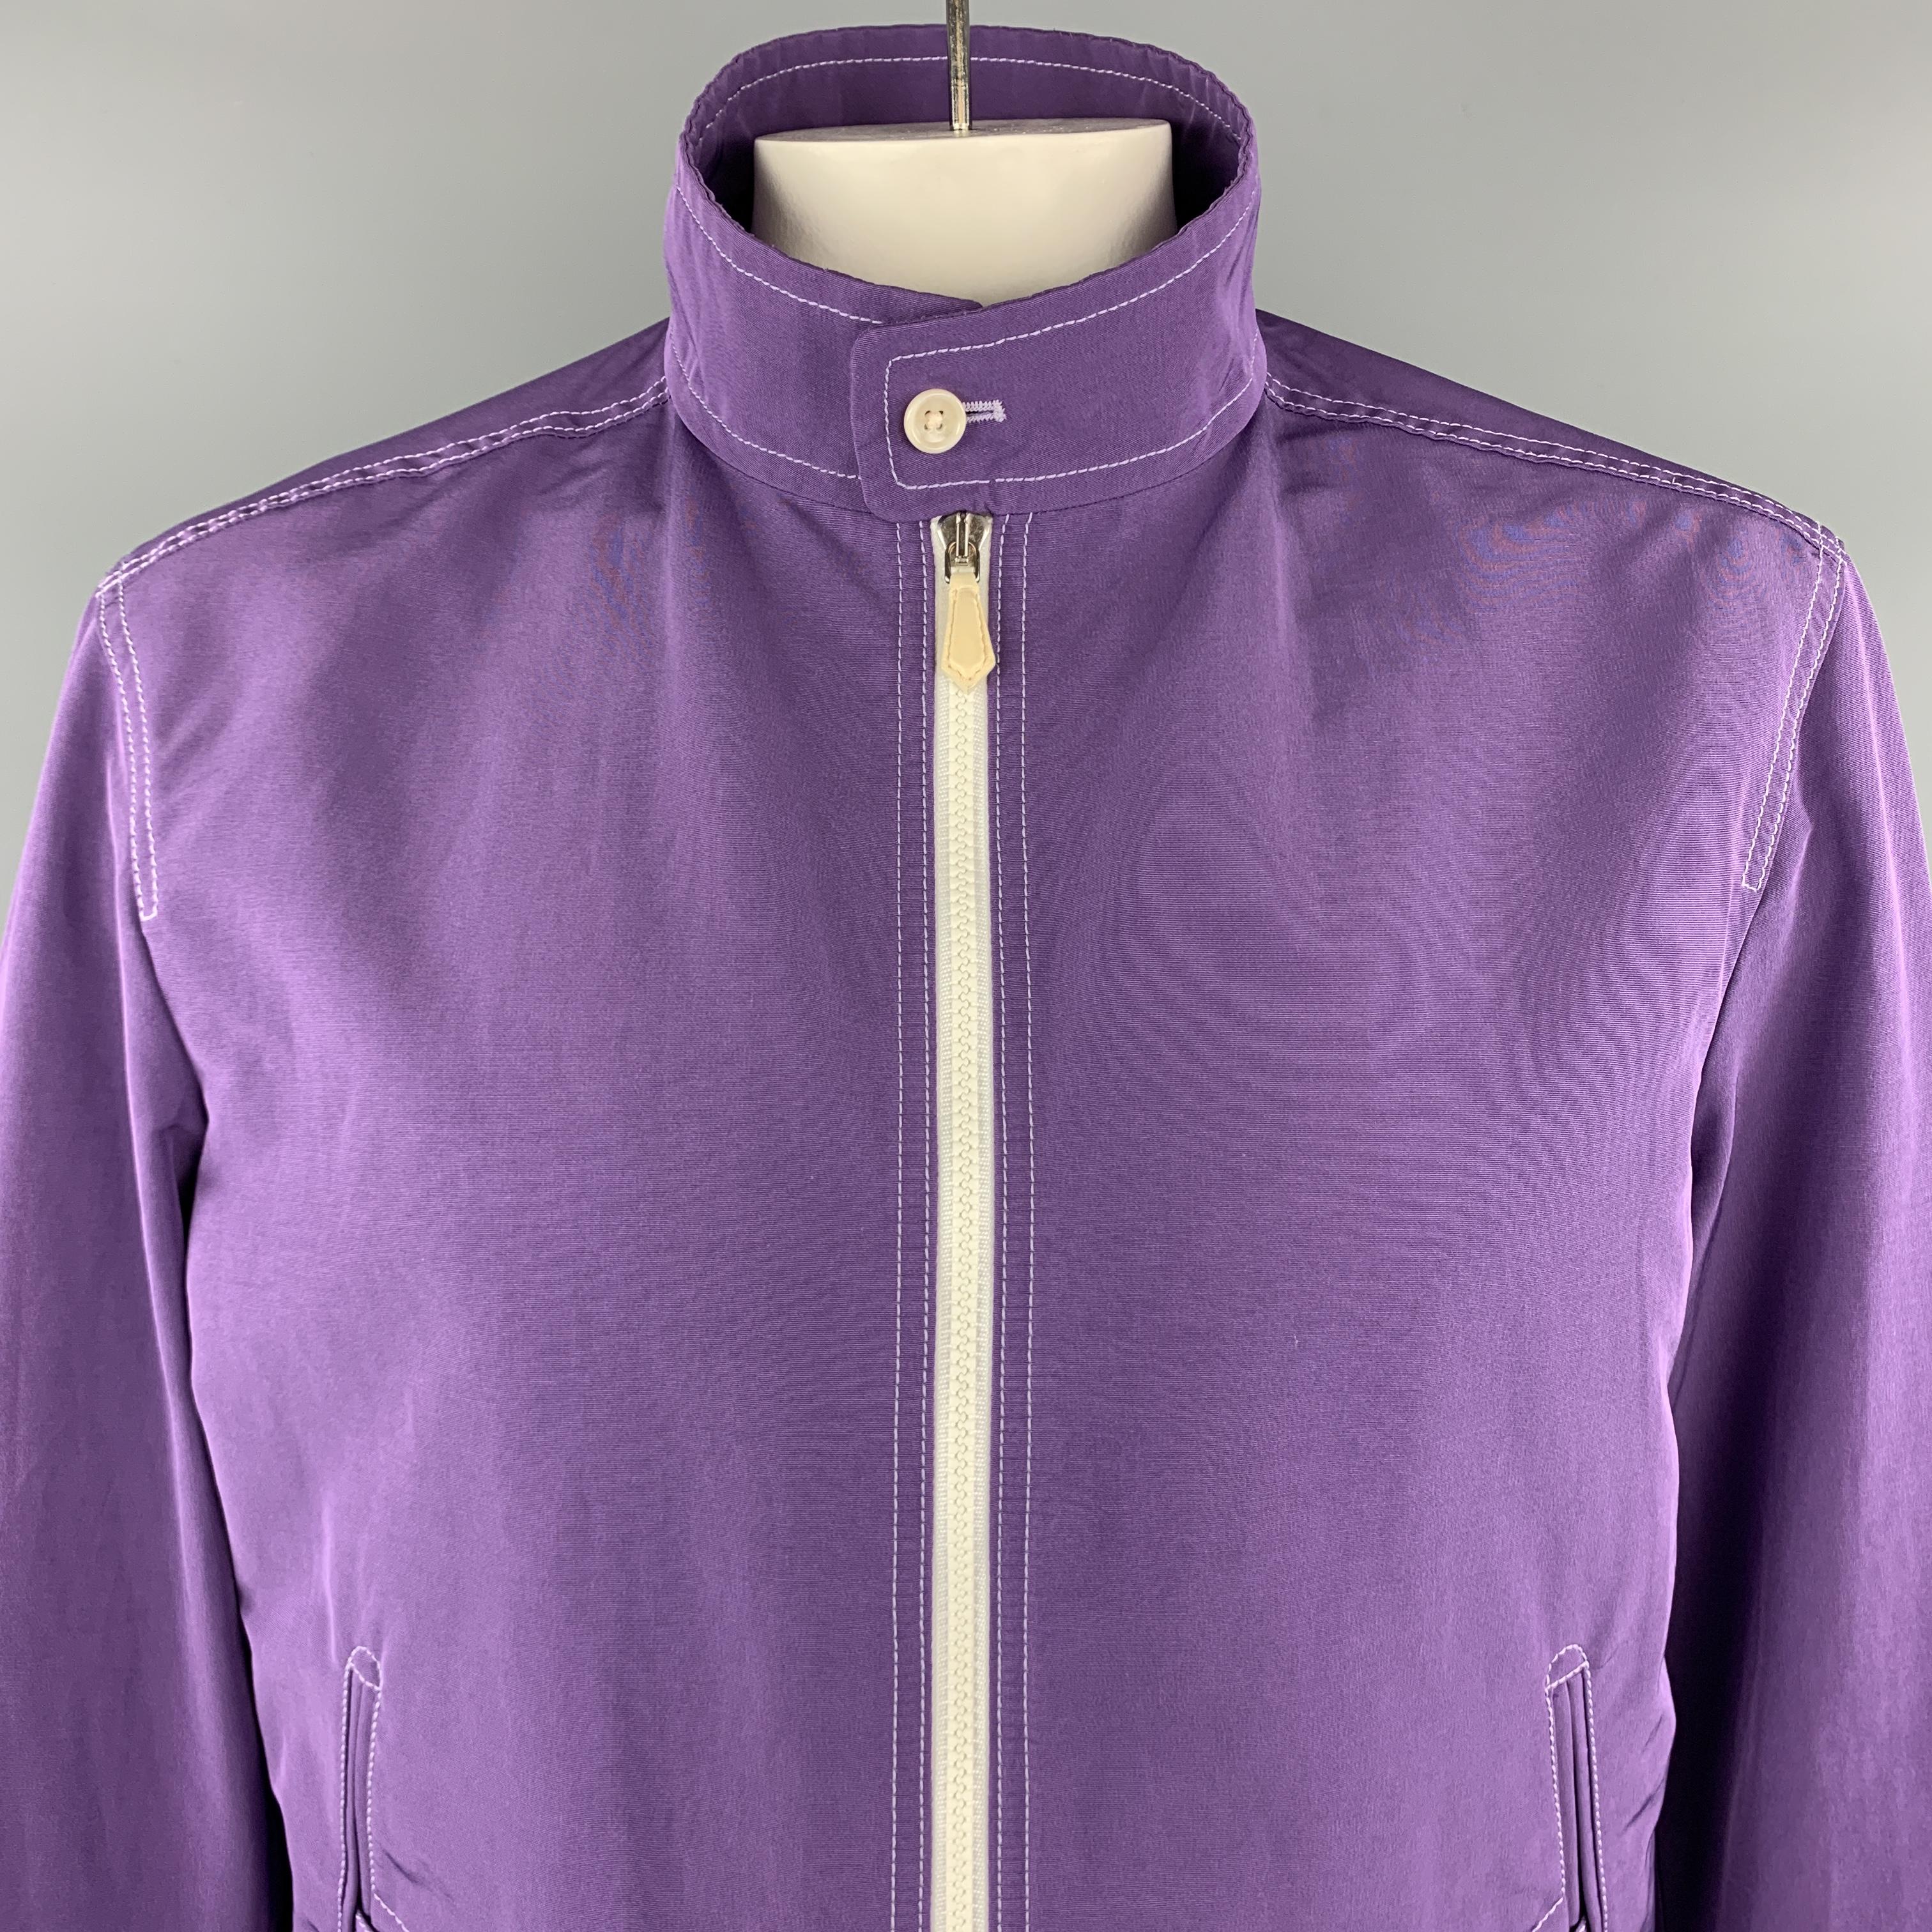 TOM FORD Jacket comes in a purple tone in a cotton blend material, with a high collar, contrast stitch and zip, buttoned pockets, ribbed cuffs, zip up. Made in Italy.

Excellent Pre-Owned Condition.
Marked: IT 52

Measurements:

Shoulder: 18.5 in.